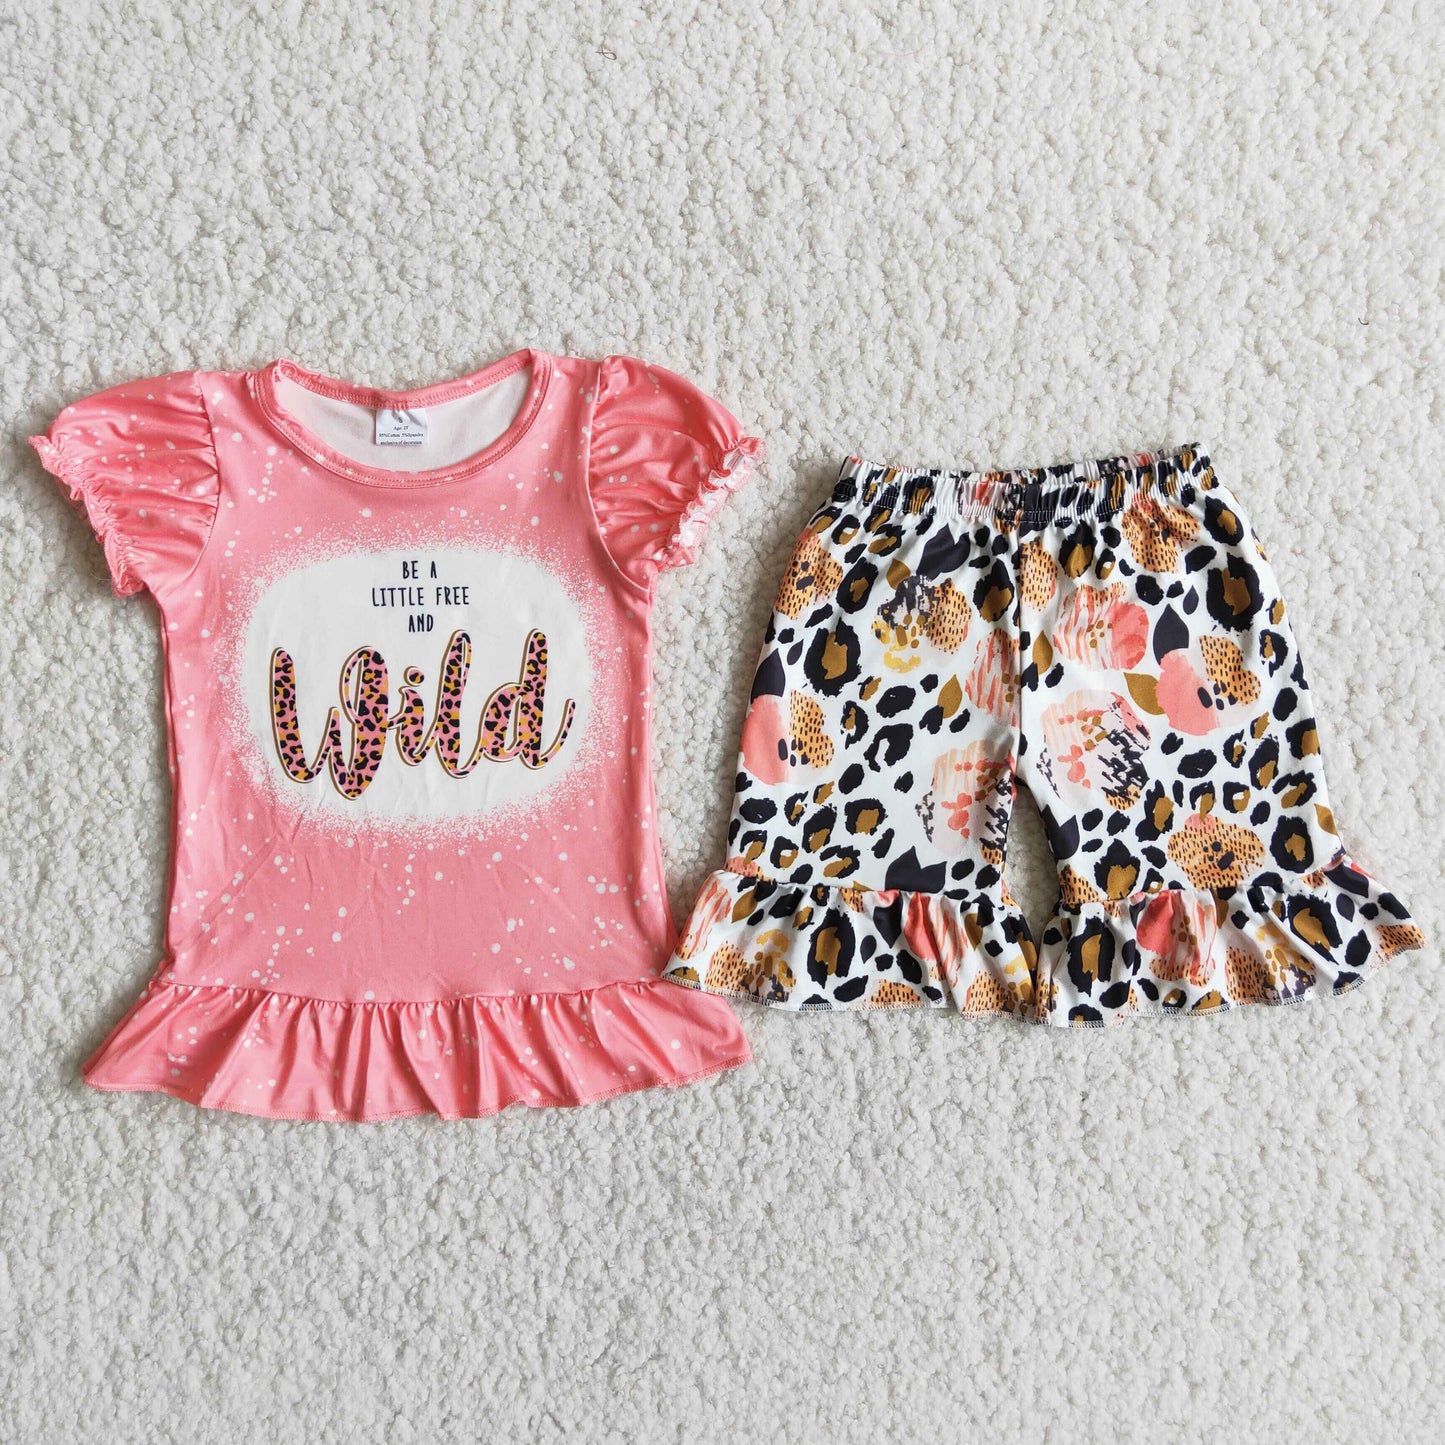 Be a free and little wild summer outfit